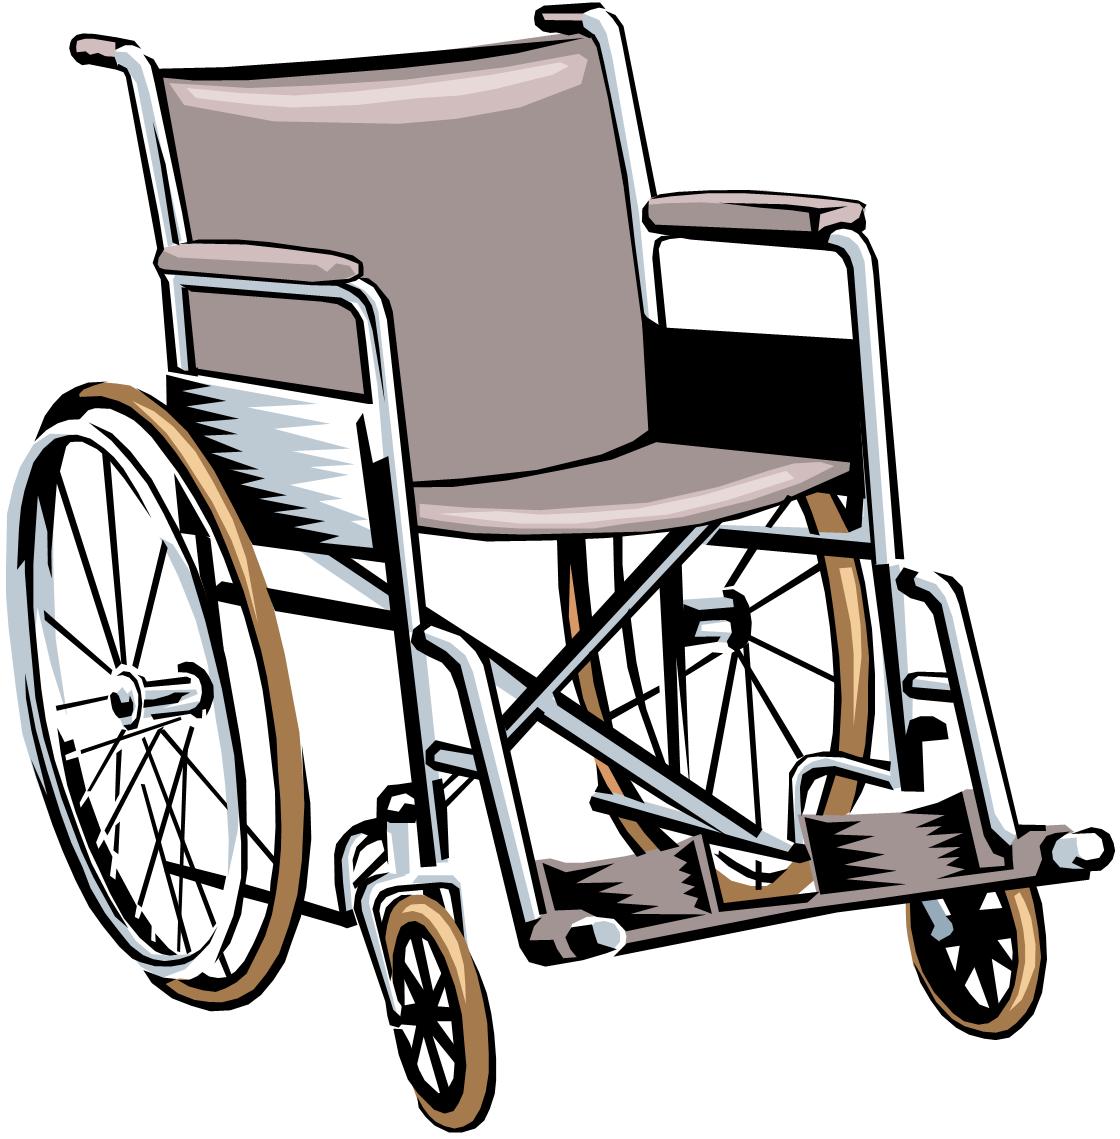 Pictures Of Wheelchairs Free Cliparts That You Can Download To You